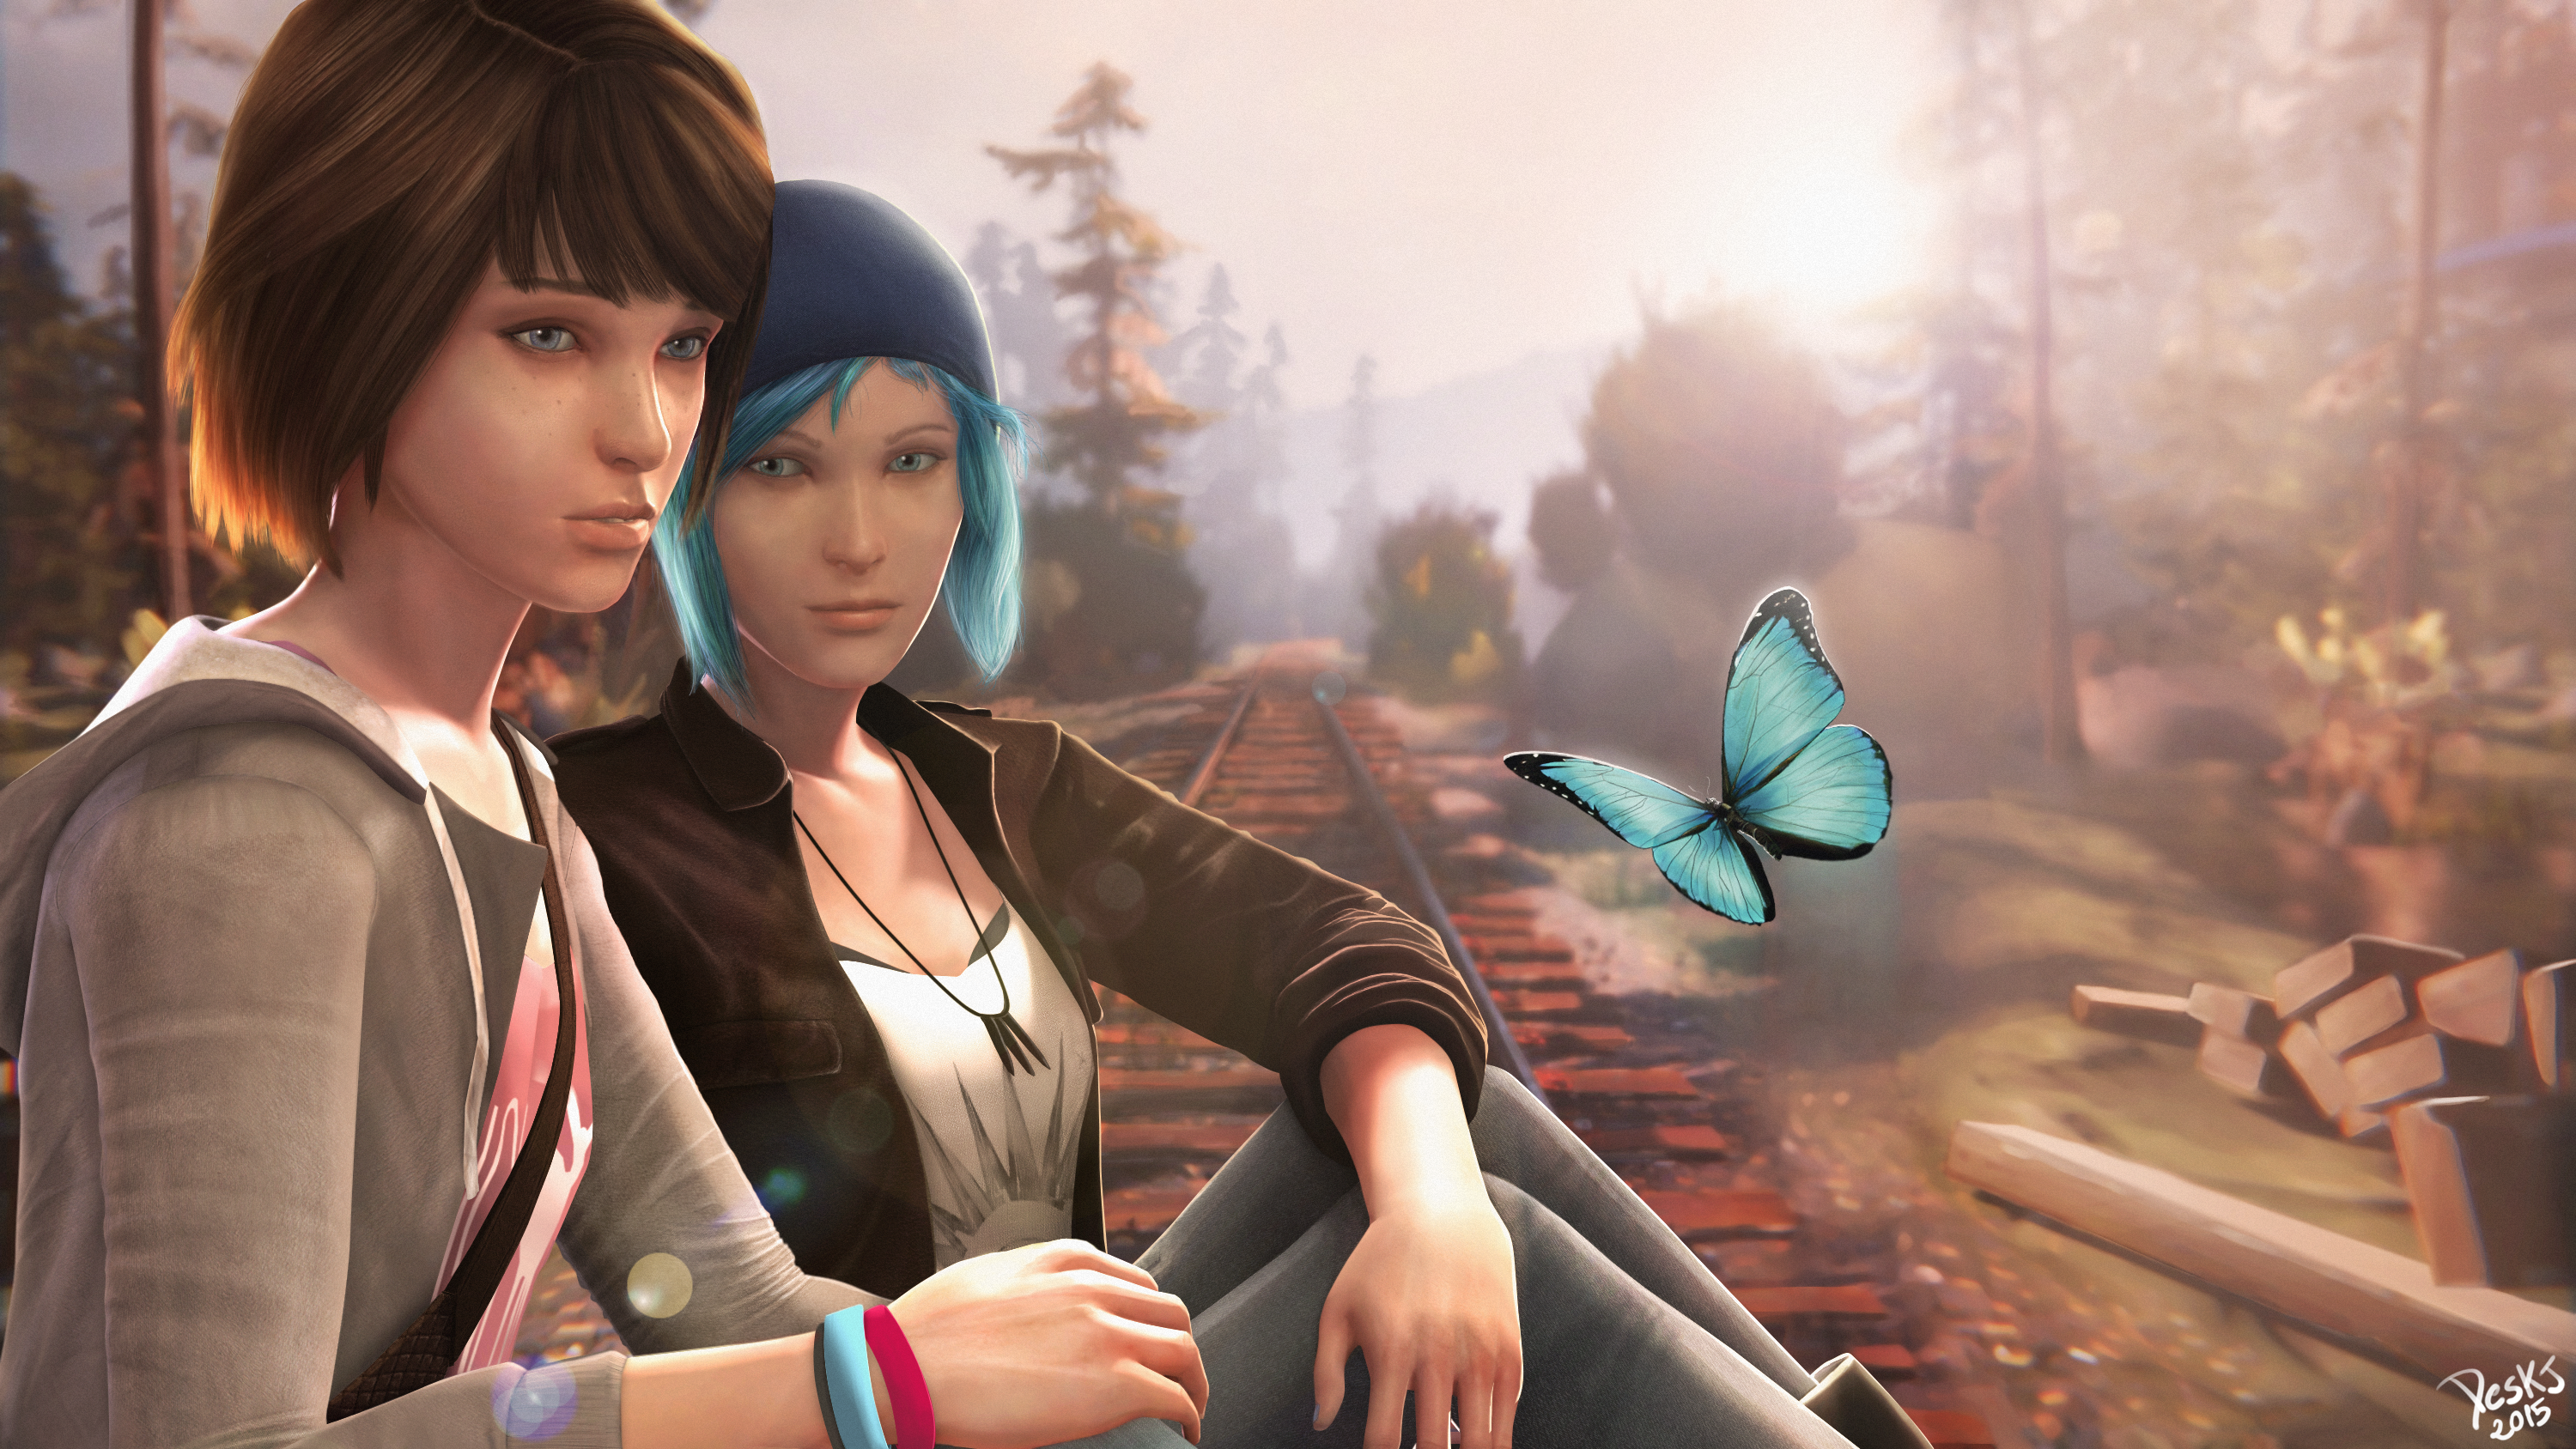 General 3000x1688 Life Is Strange Max Caulfield Chloe Price video games PC gaming two women butterfly insect railway video game girls 2015 (Year)